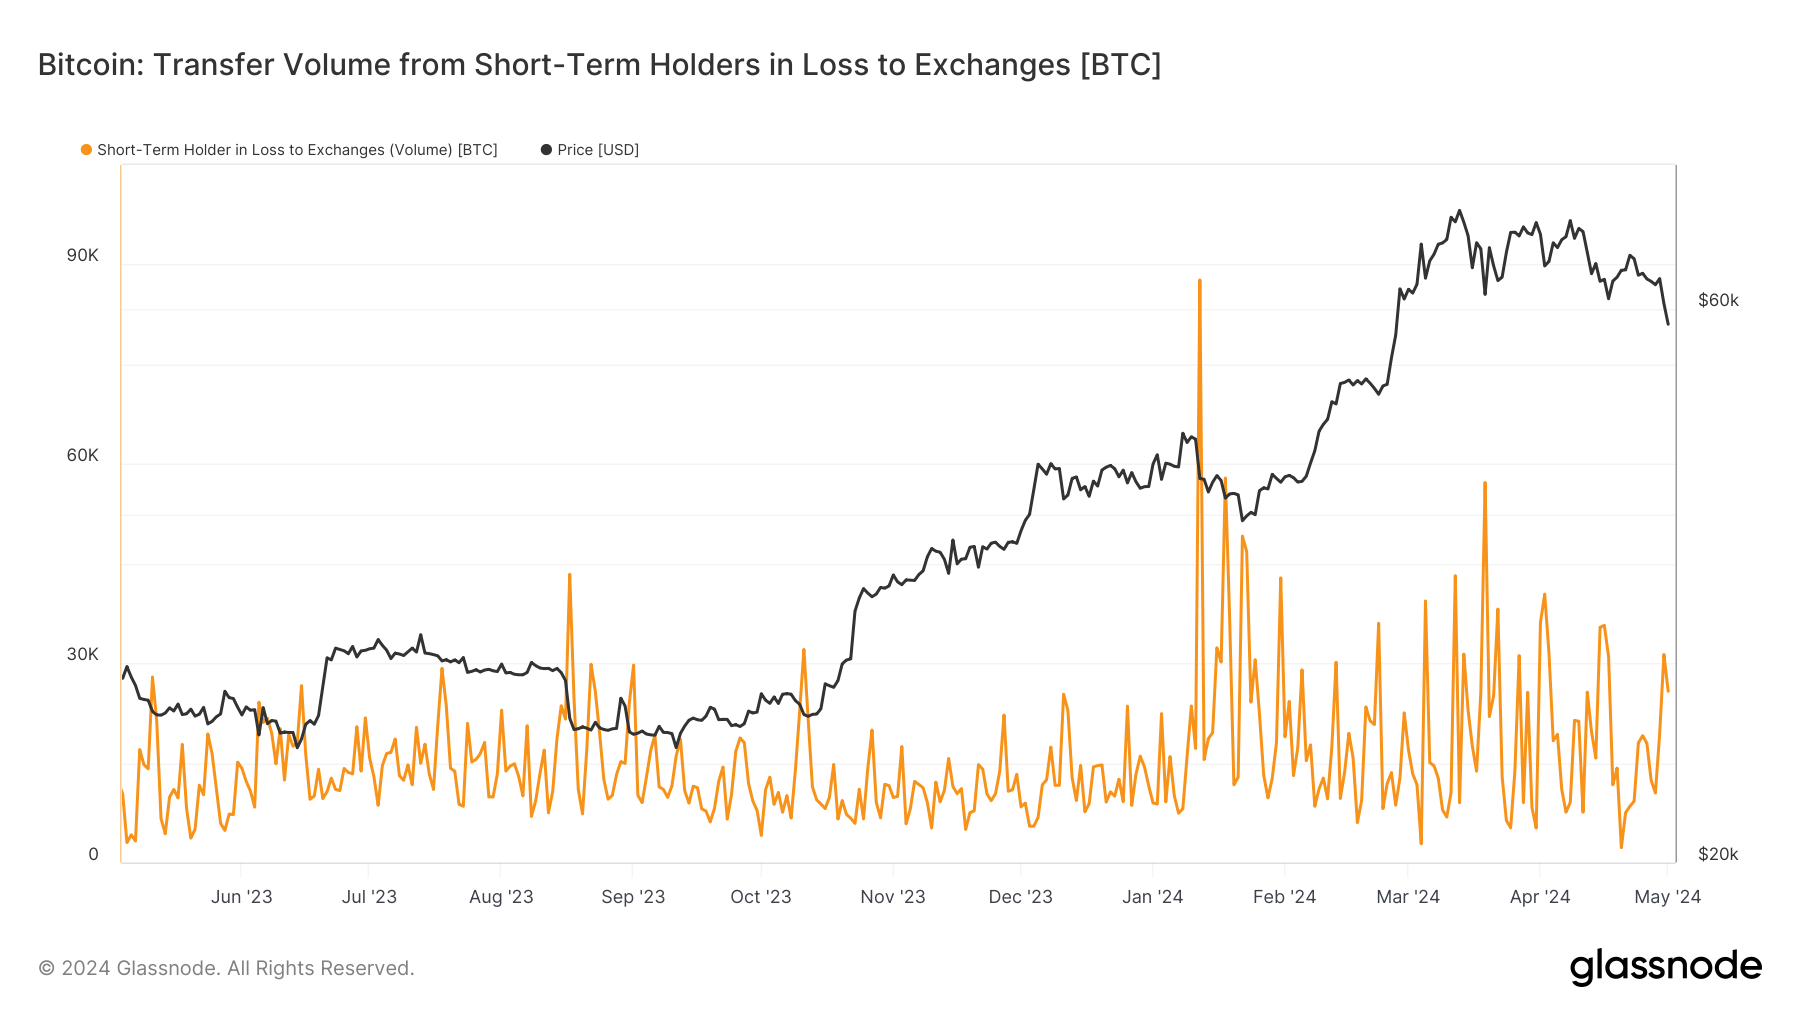 Short Term Holders in Loss to Exchanges: (Source: Glassnode)